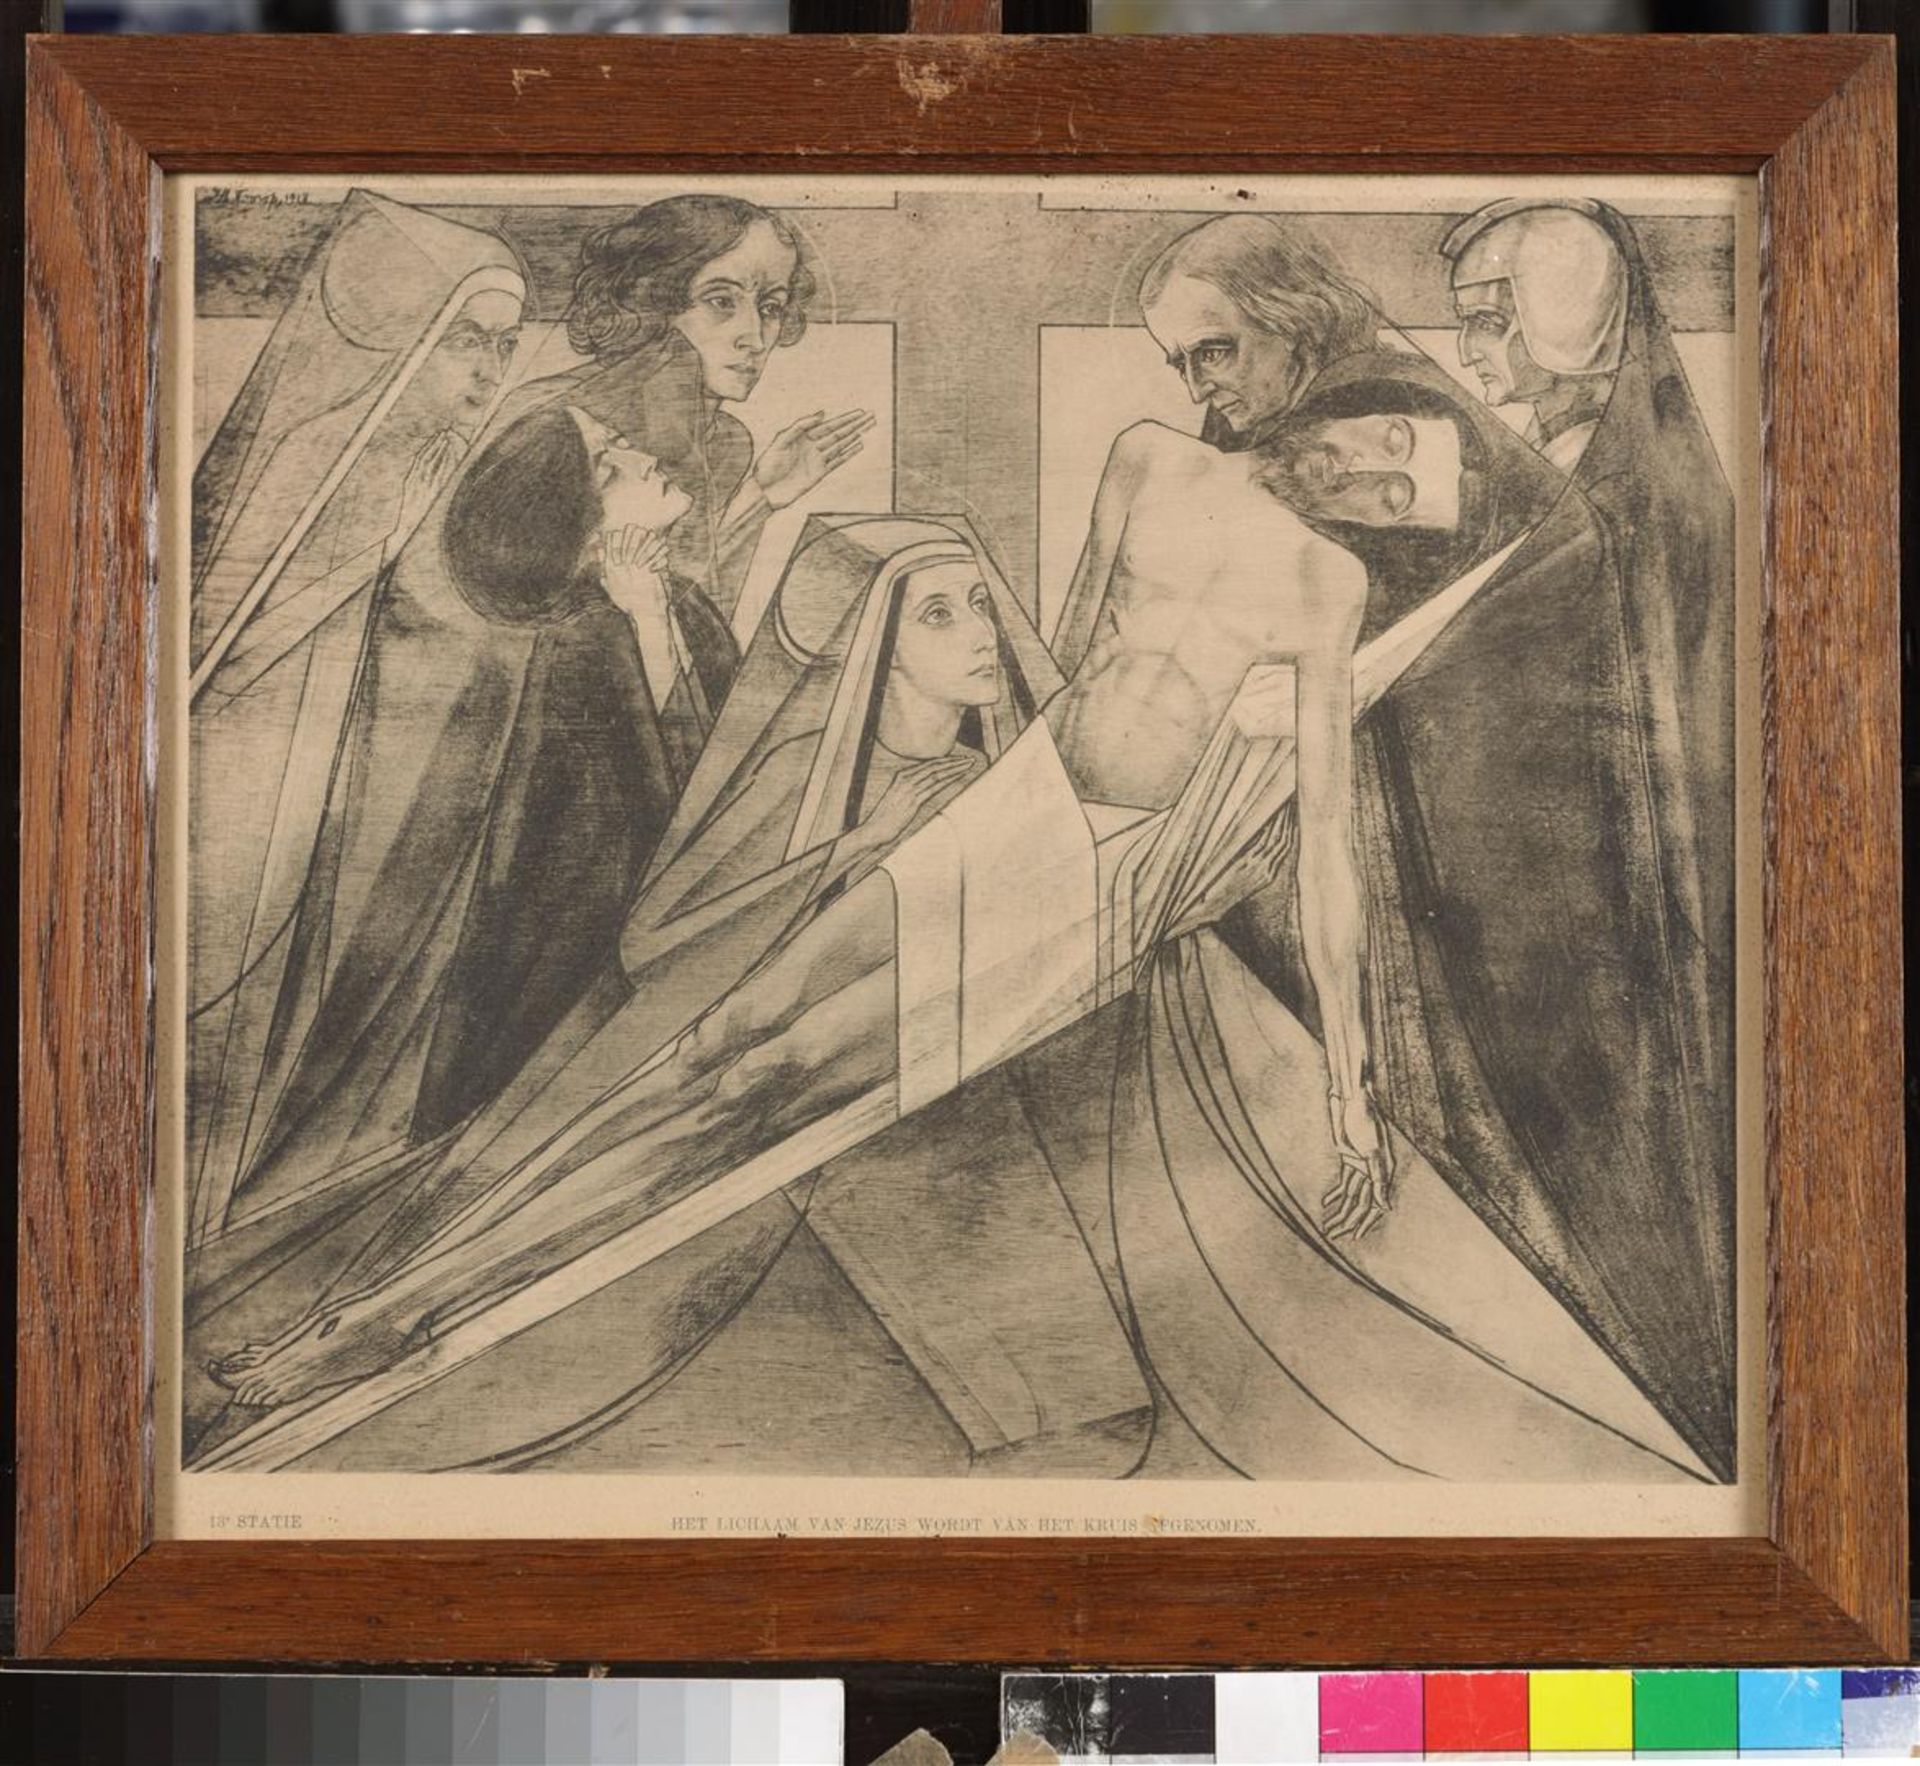 Thirteen lithographs of the Way of the Cross by Jan Toorop  - Image 14 of 14